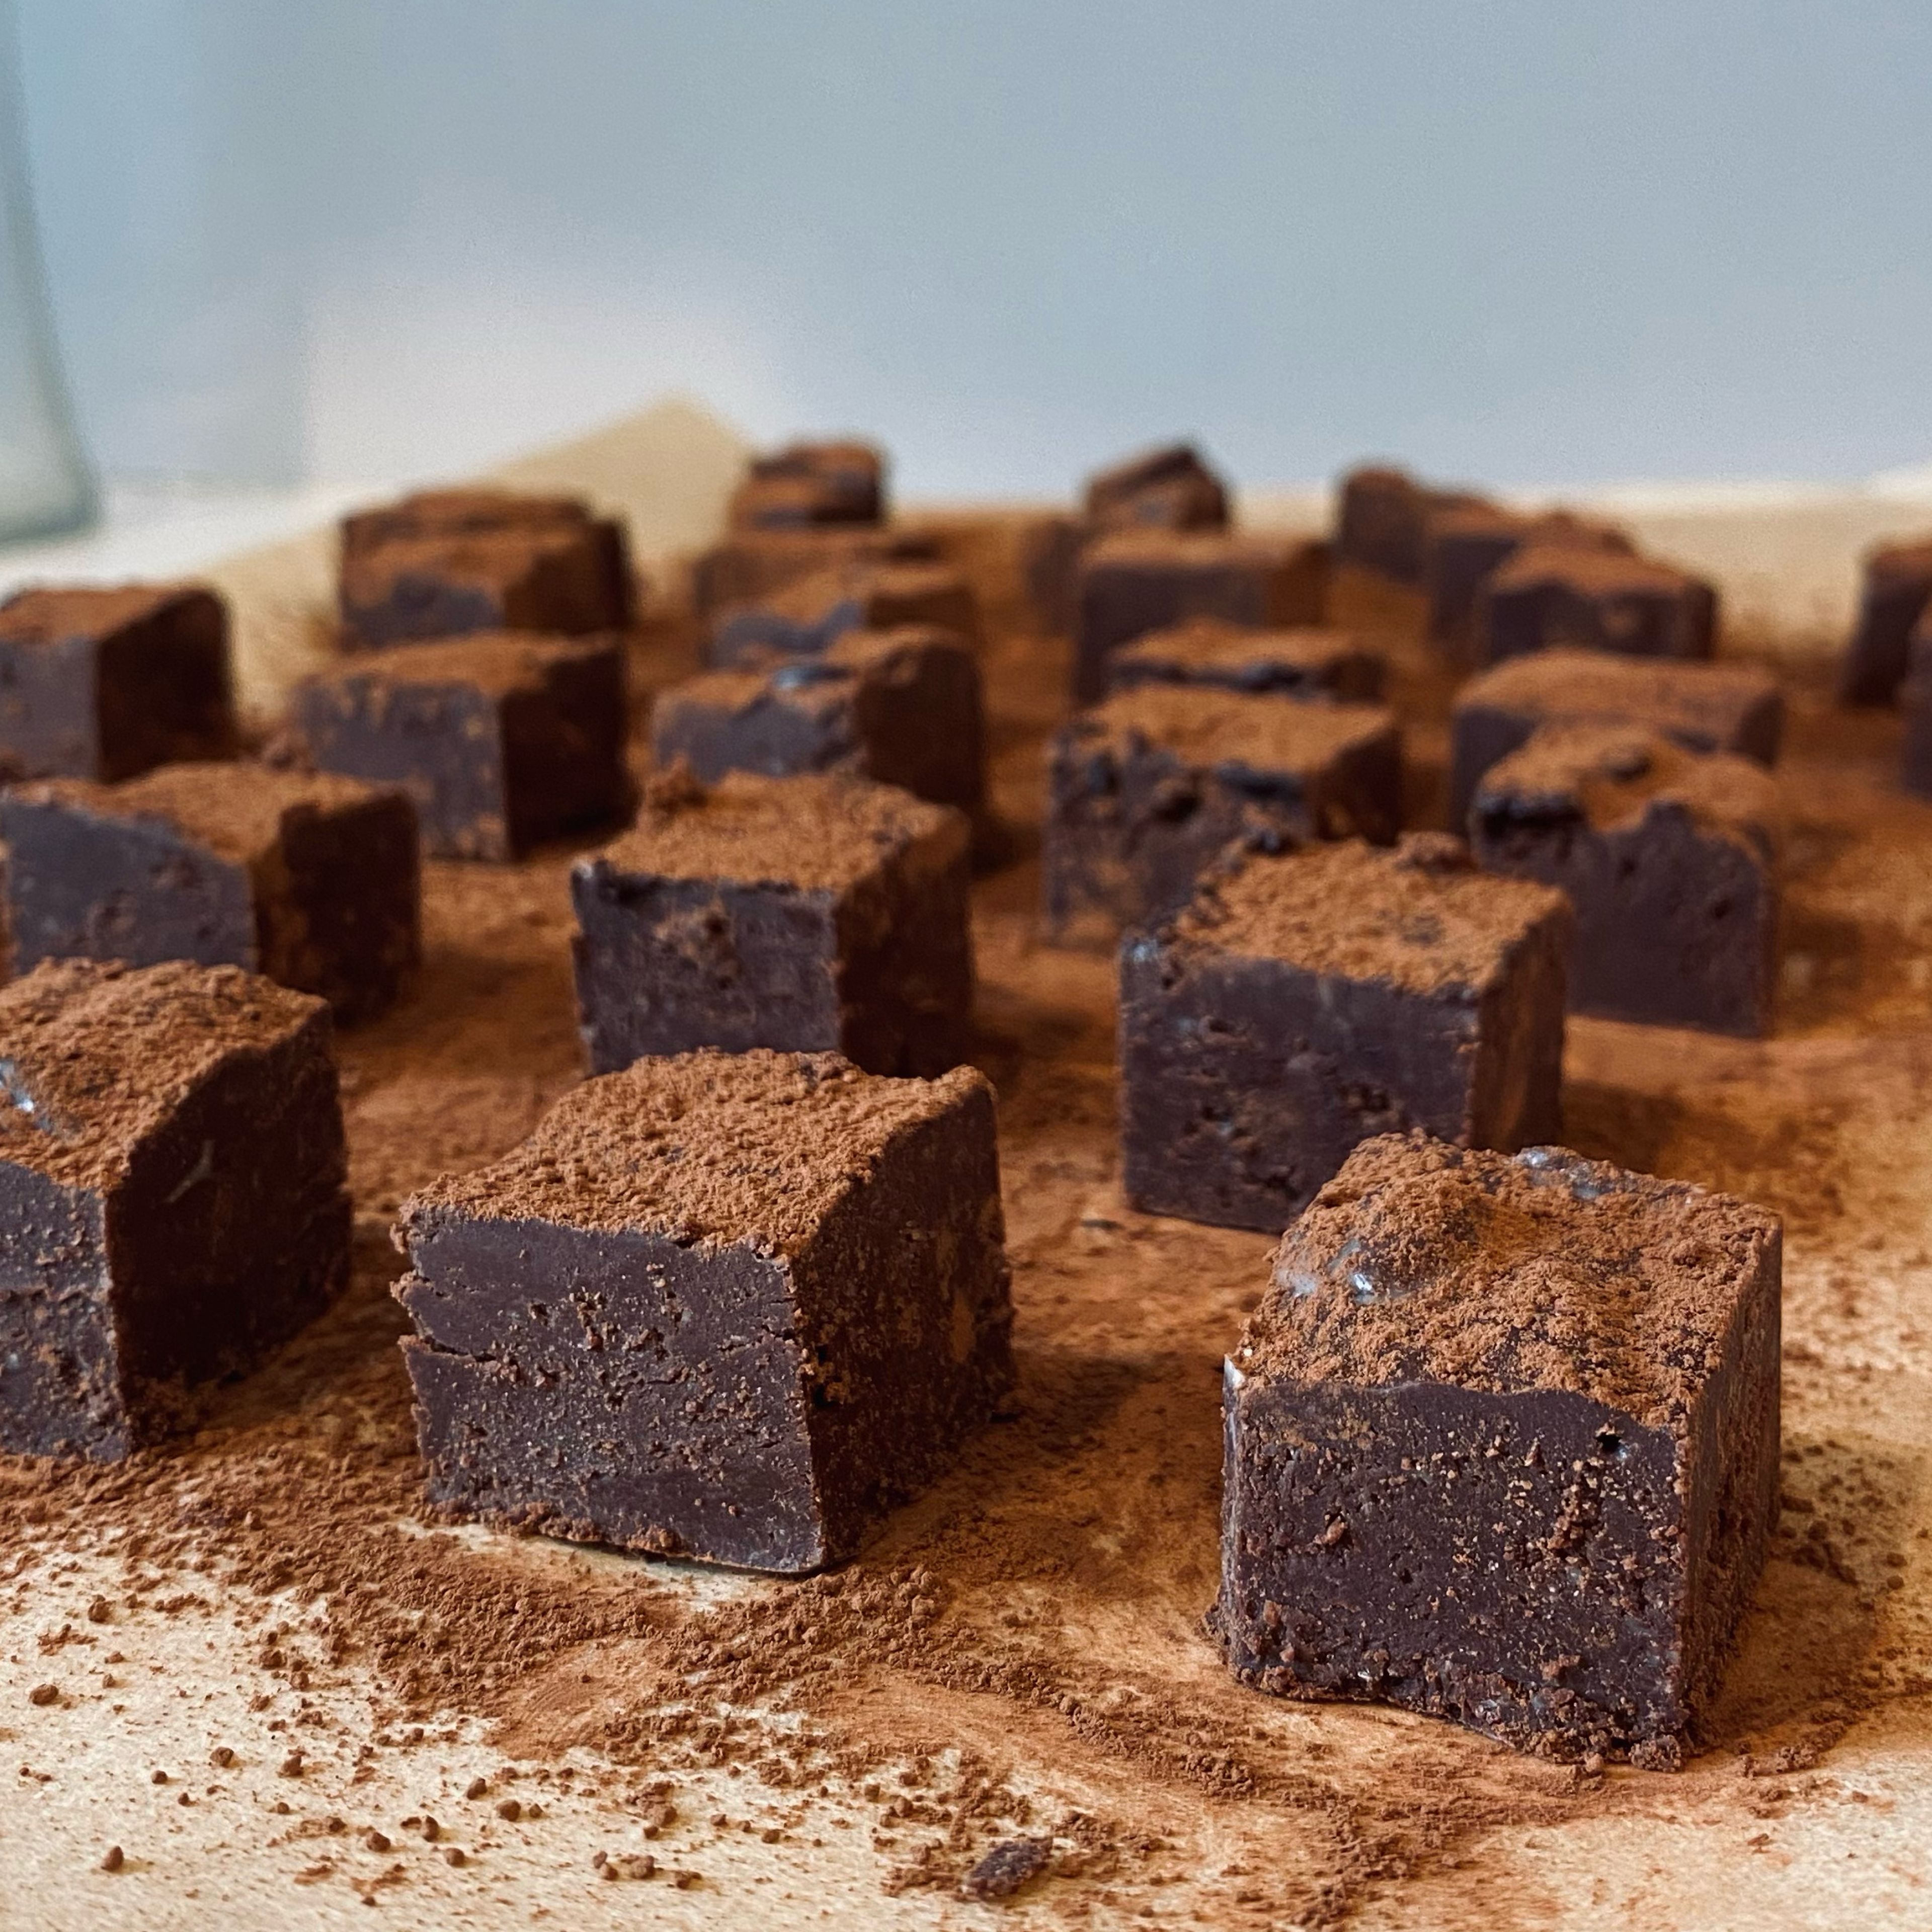 Once removed from tin, cut them into squares. Dust with cocoa powder.